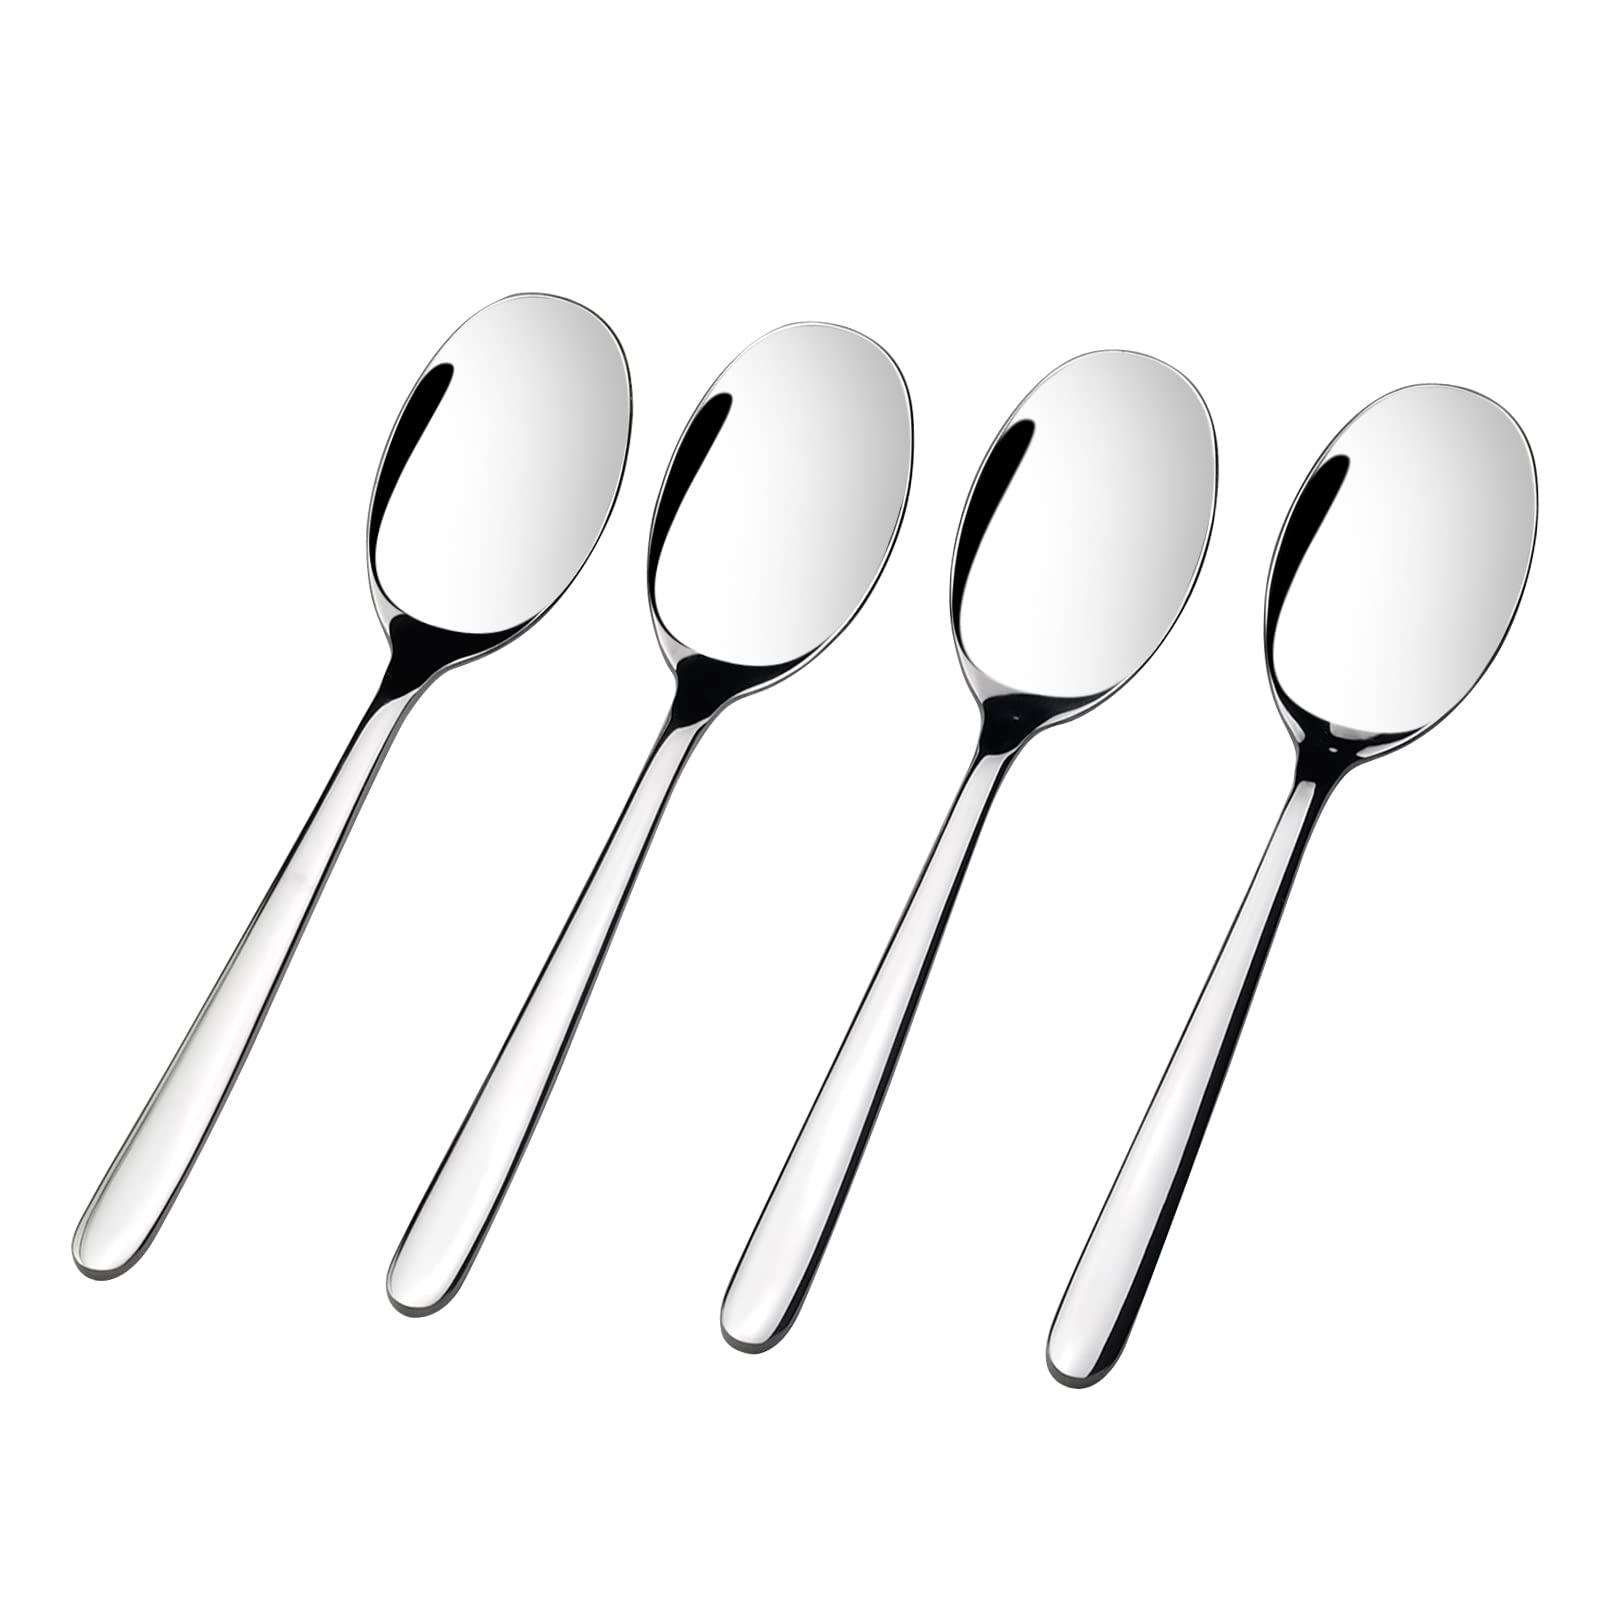 Parlynies 8 Pieces Large Serving Spoons, Stainless Steel Buffet Serving Spoons